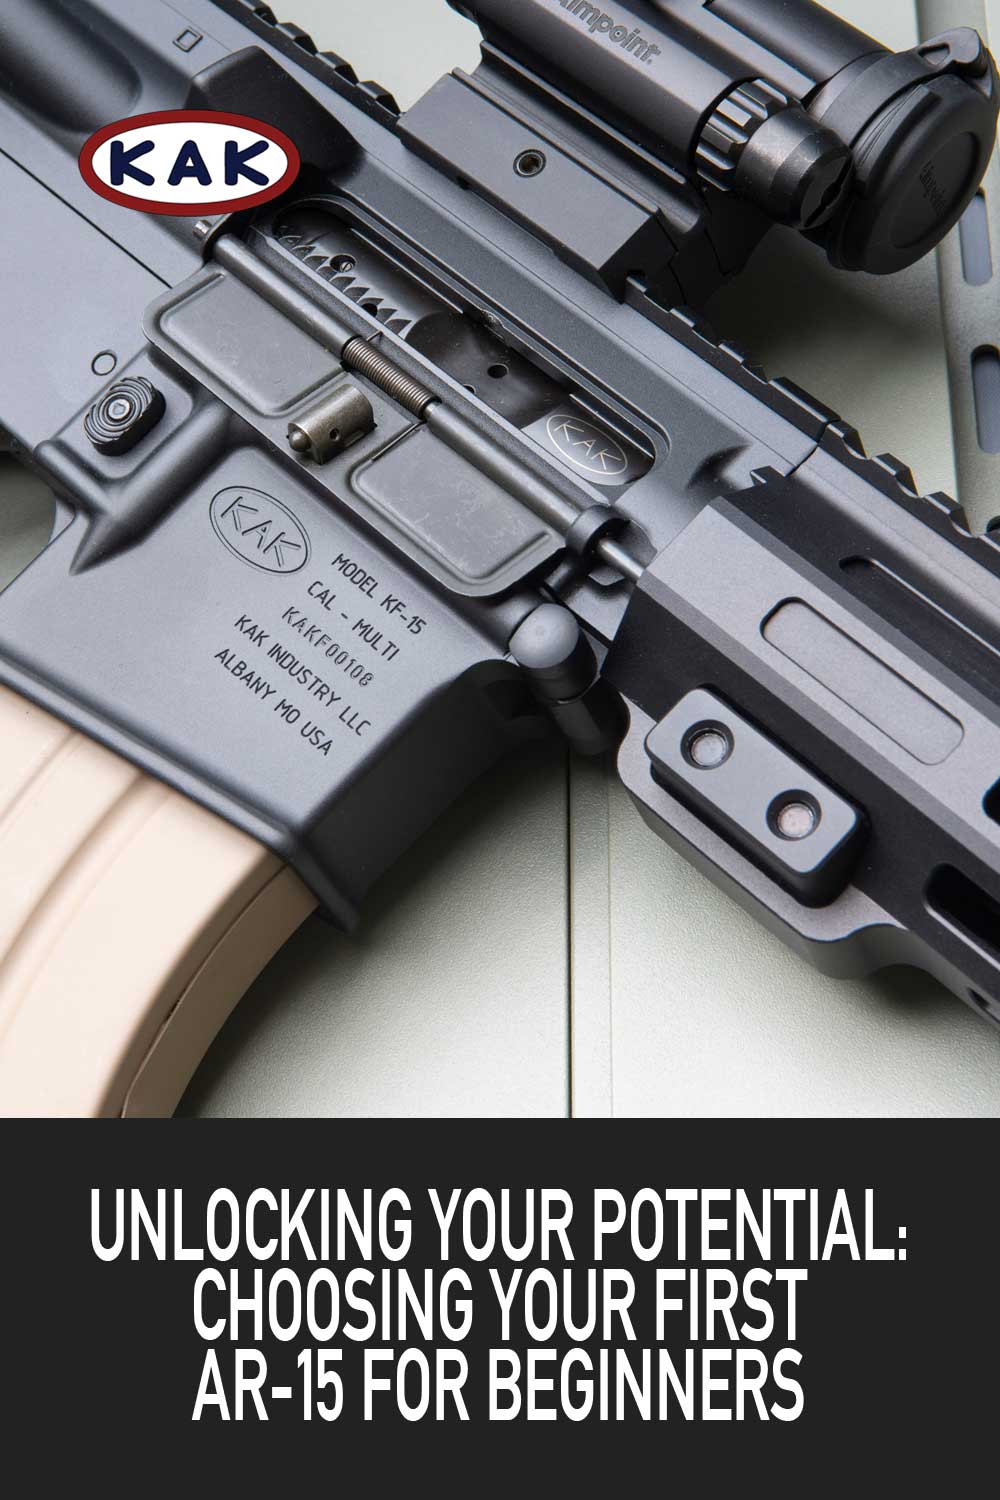 Unlocking Your Potential: Choosing Your First AR-15 for Beginners